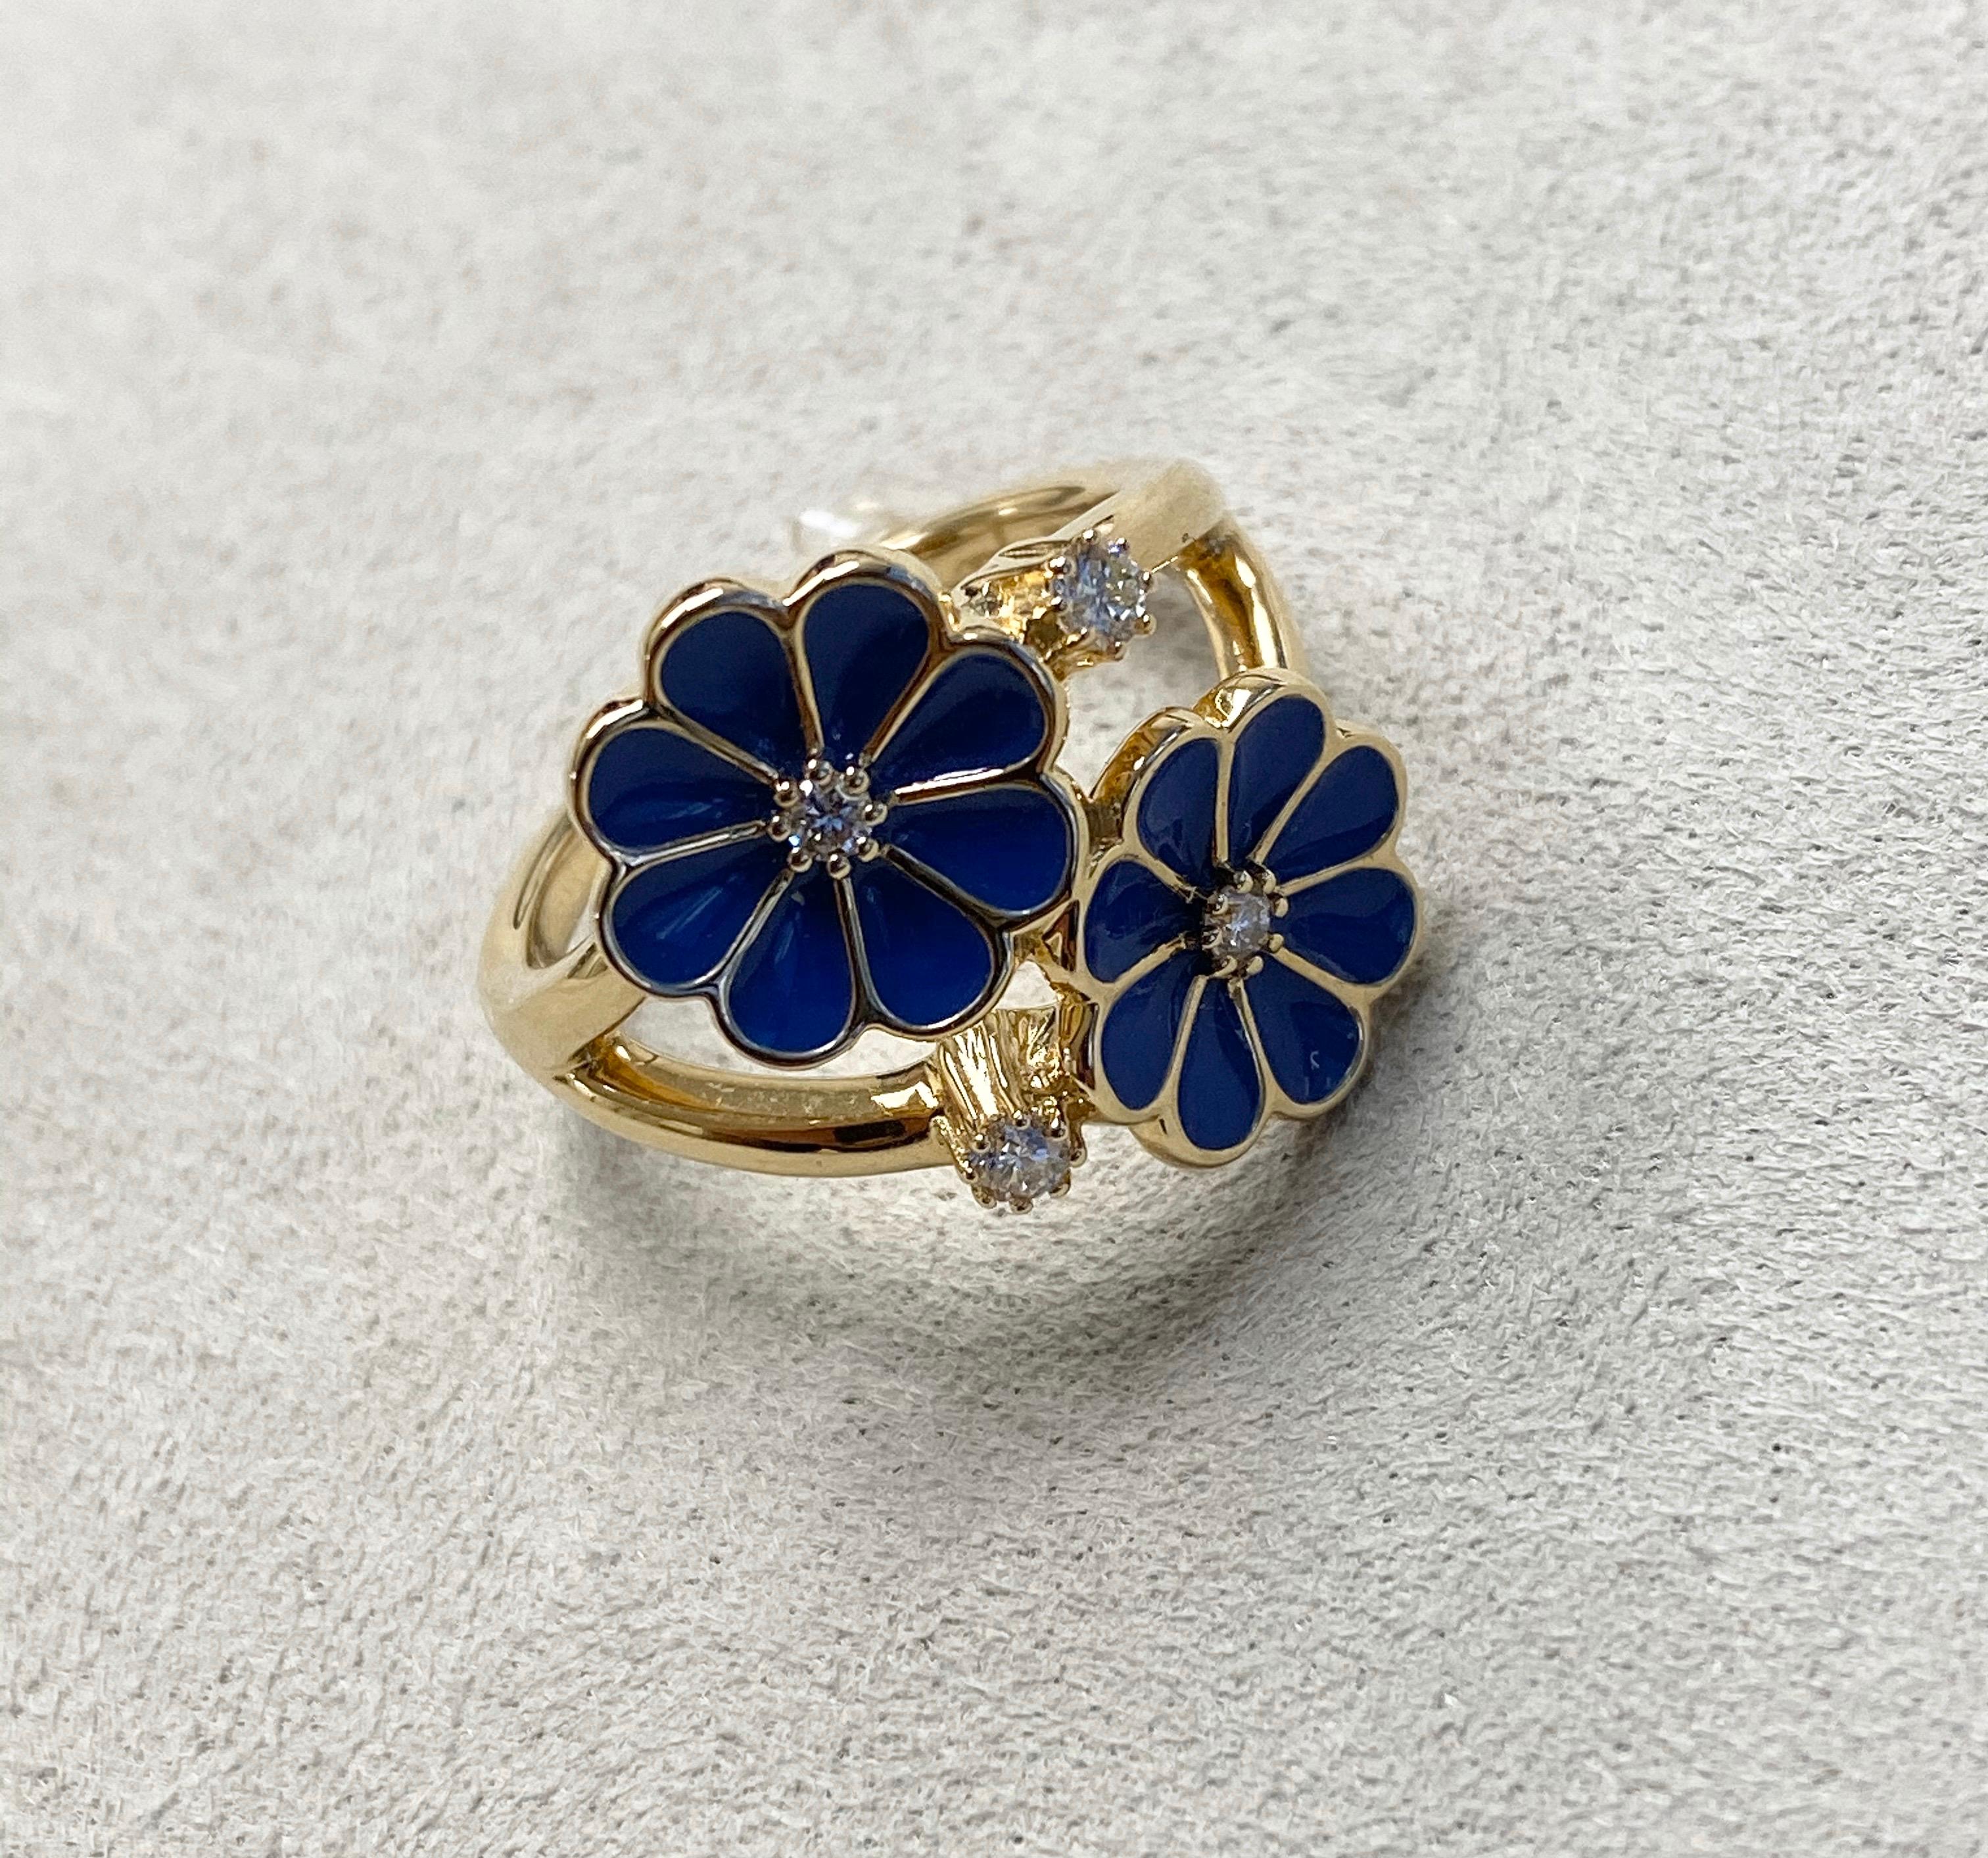 Round Cut Syna Yellow Gold Blue Enamel Ring with Champagne Diamonds